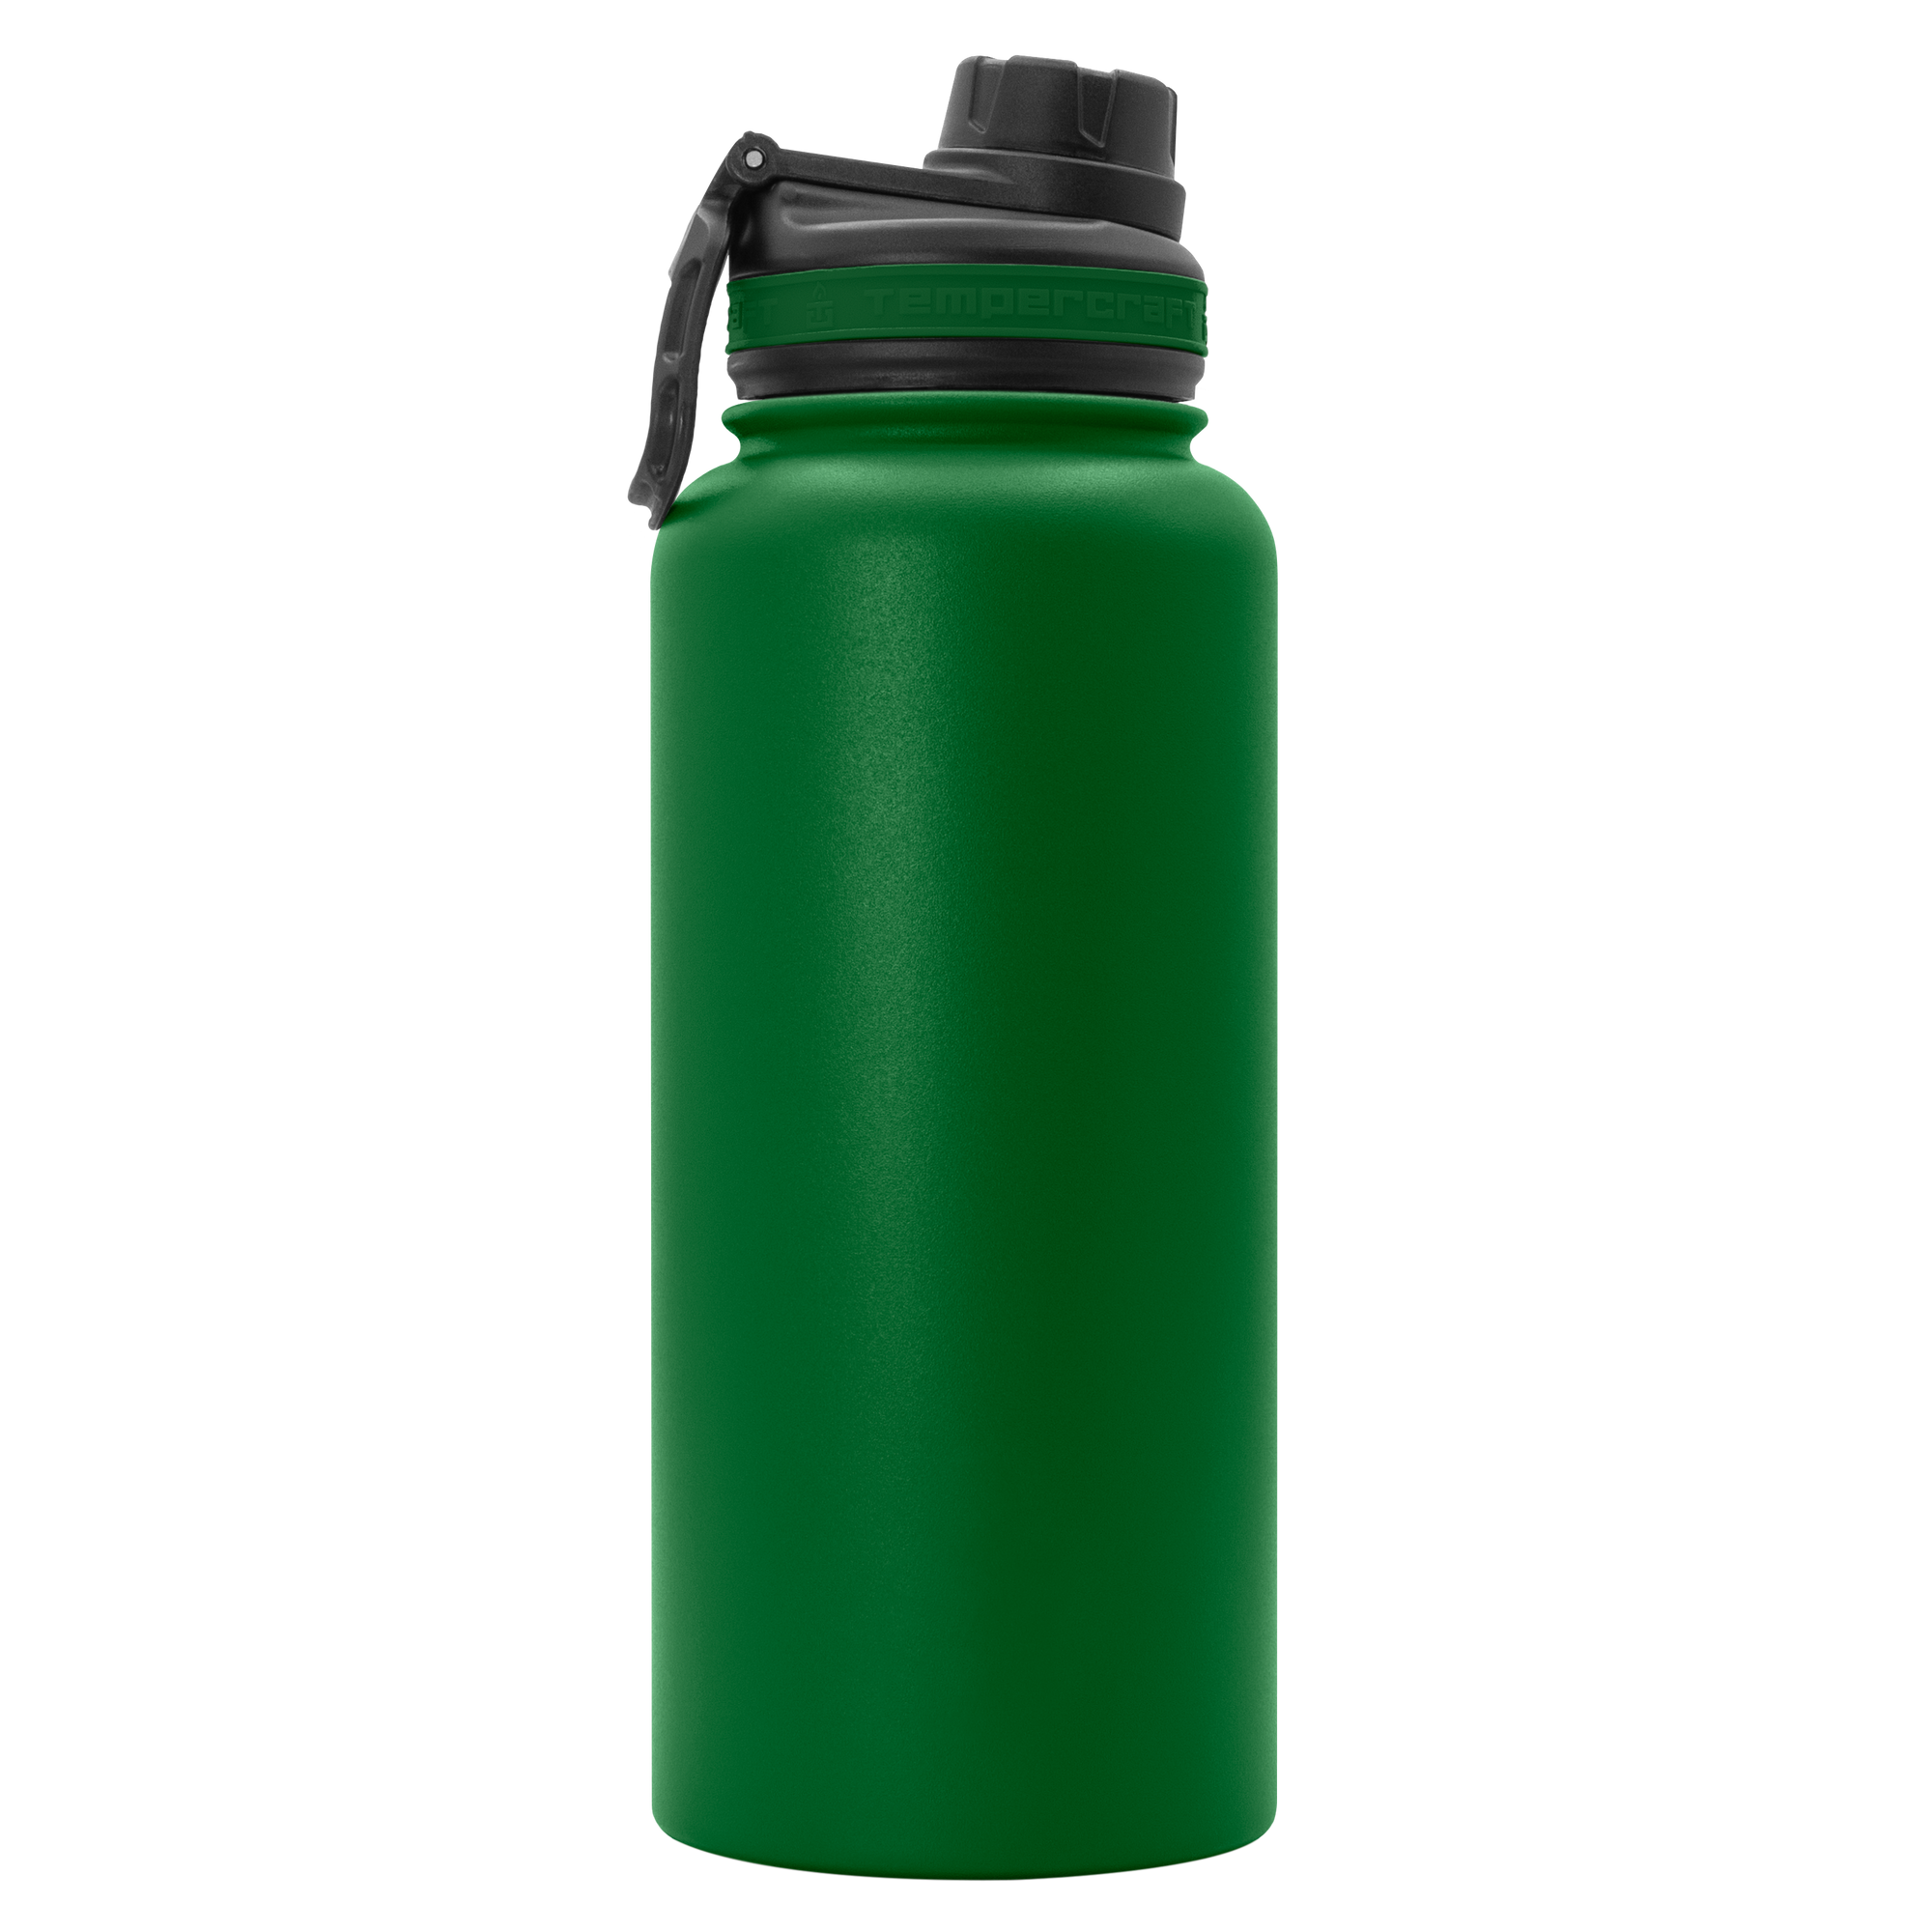 Shop online with Limited Edition: Neon Green 32oz Stainless Steel Bottle &  Lid Cirkul . Today you can browse the latest fashions and brand names on  the internet